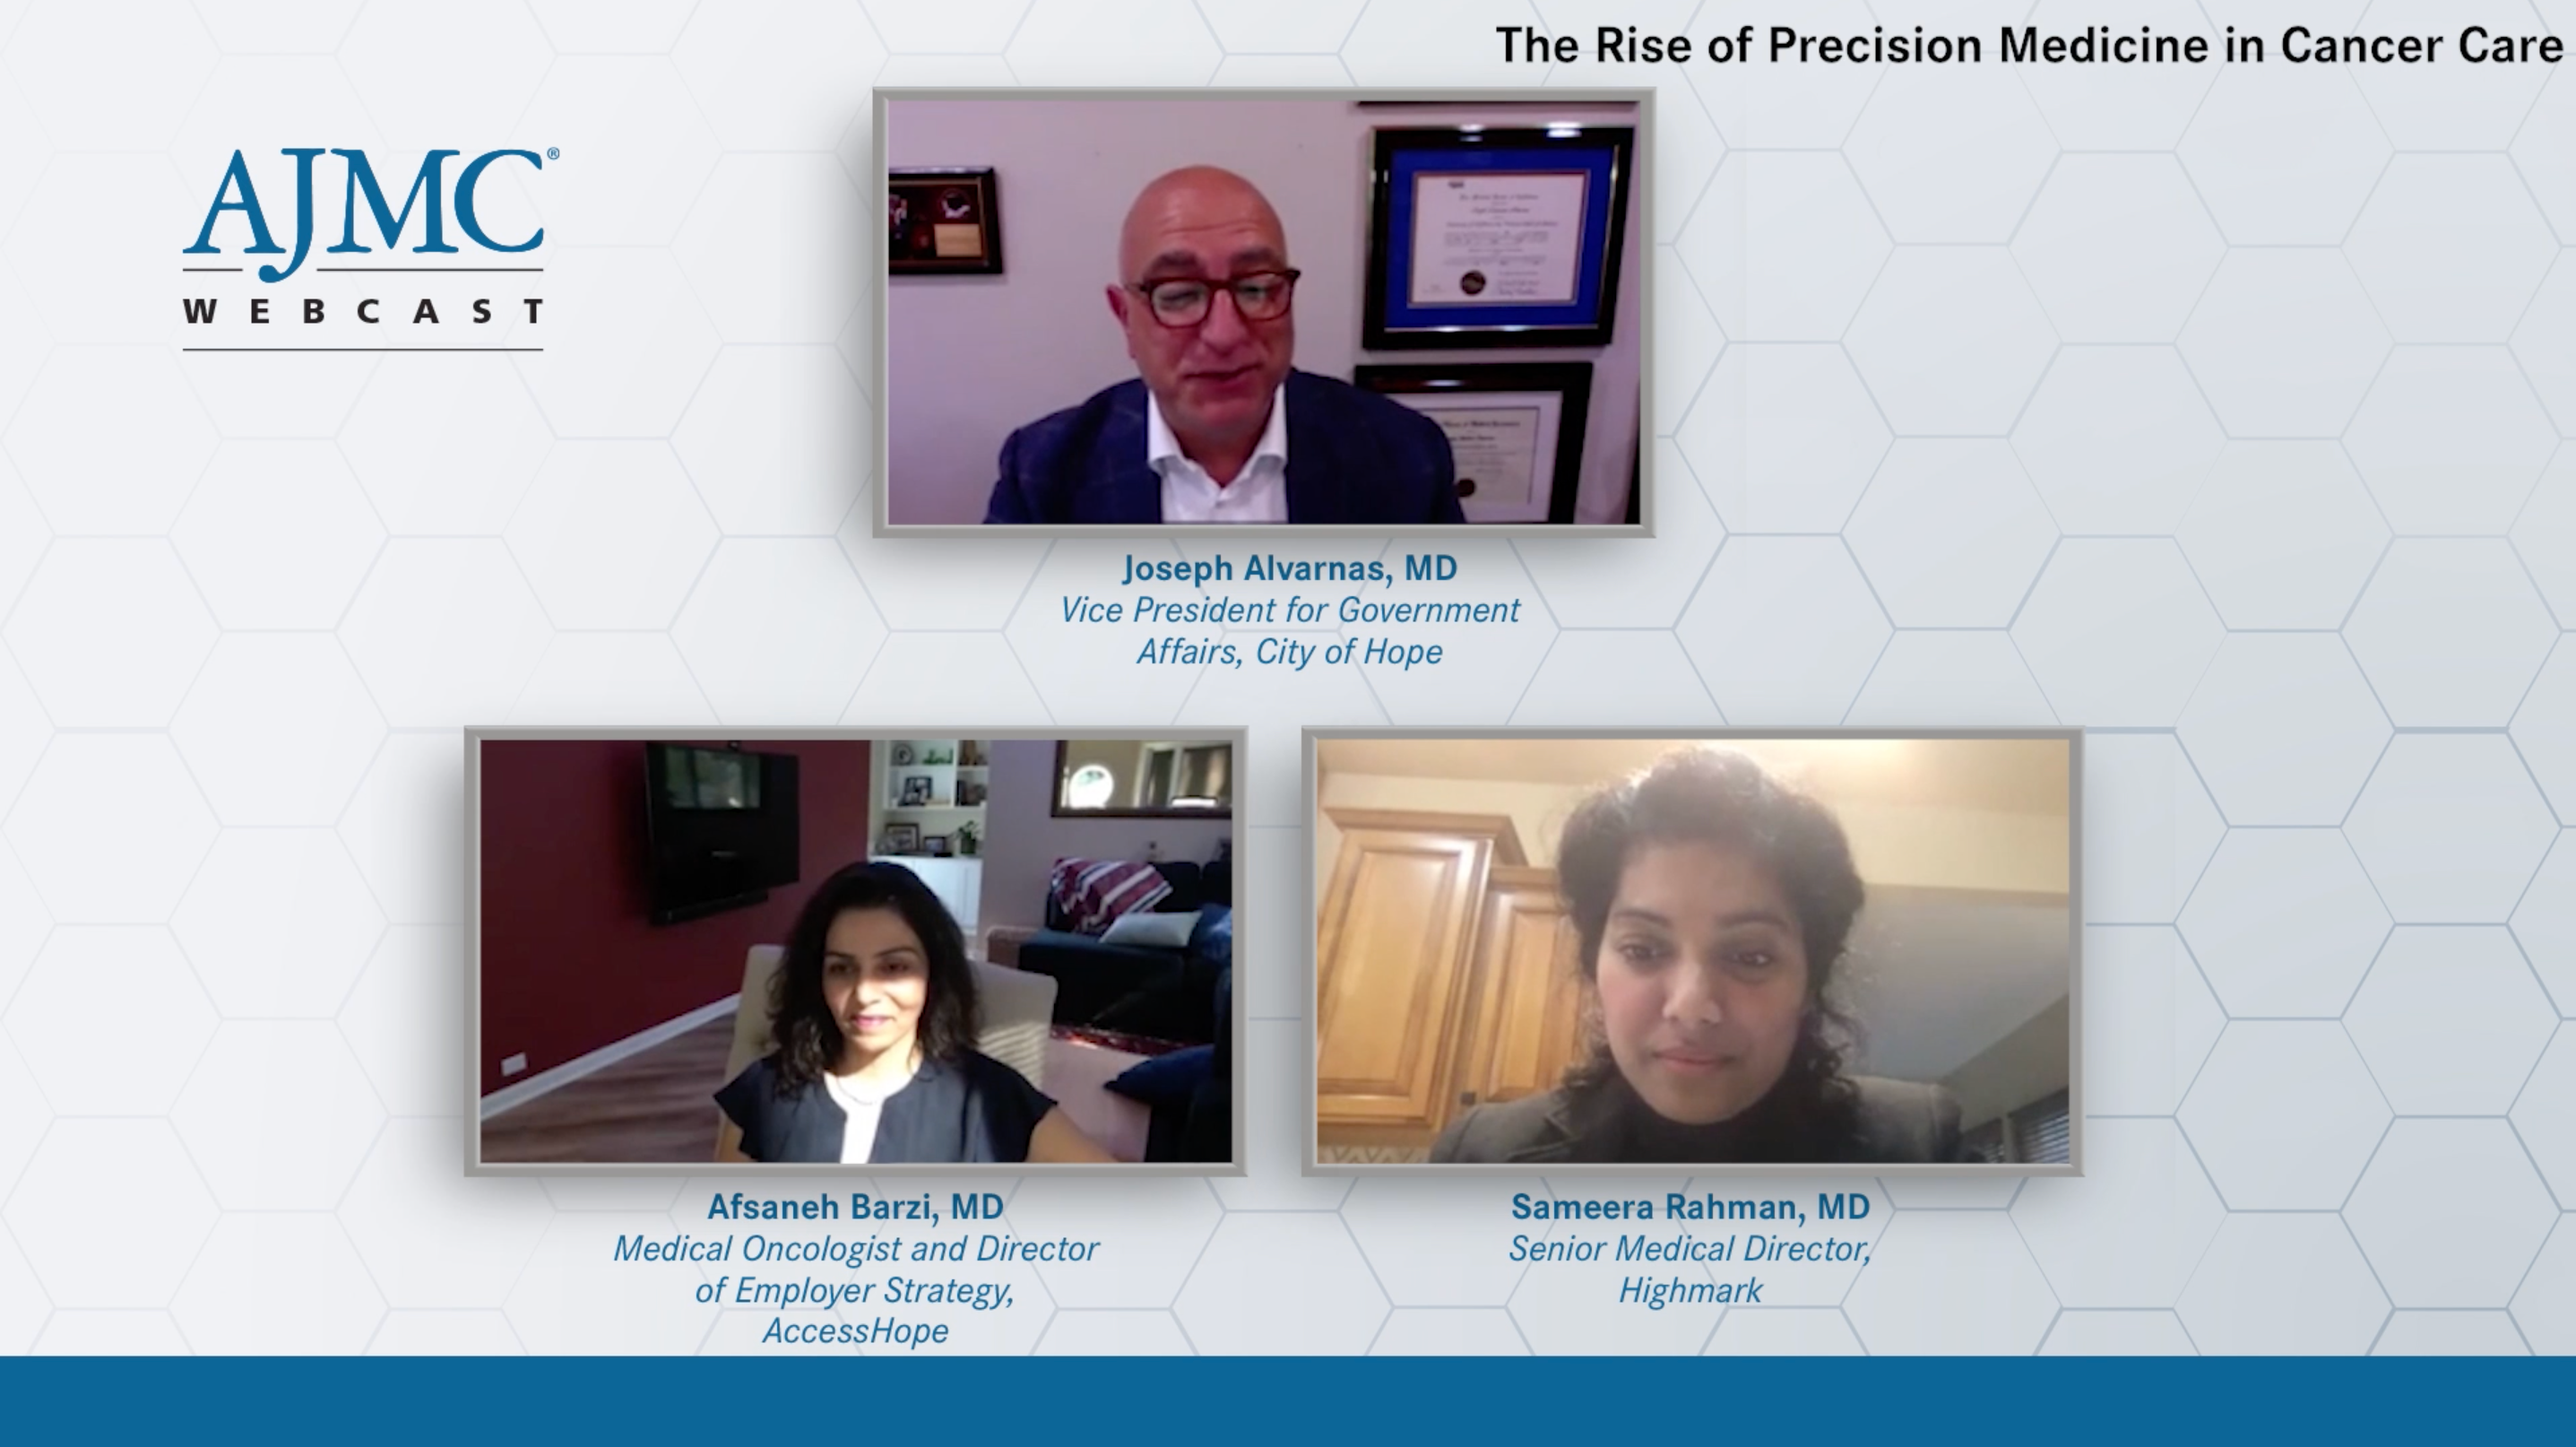 Oncology Value Coalition: Bringing Precision Medicine Solutions to the Cancer Journey, Part 1